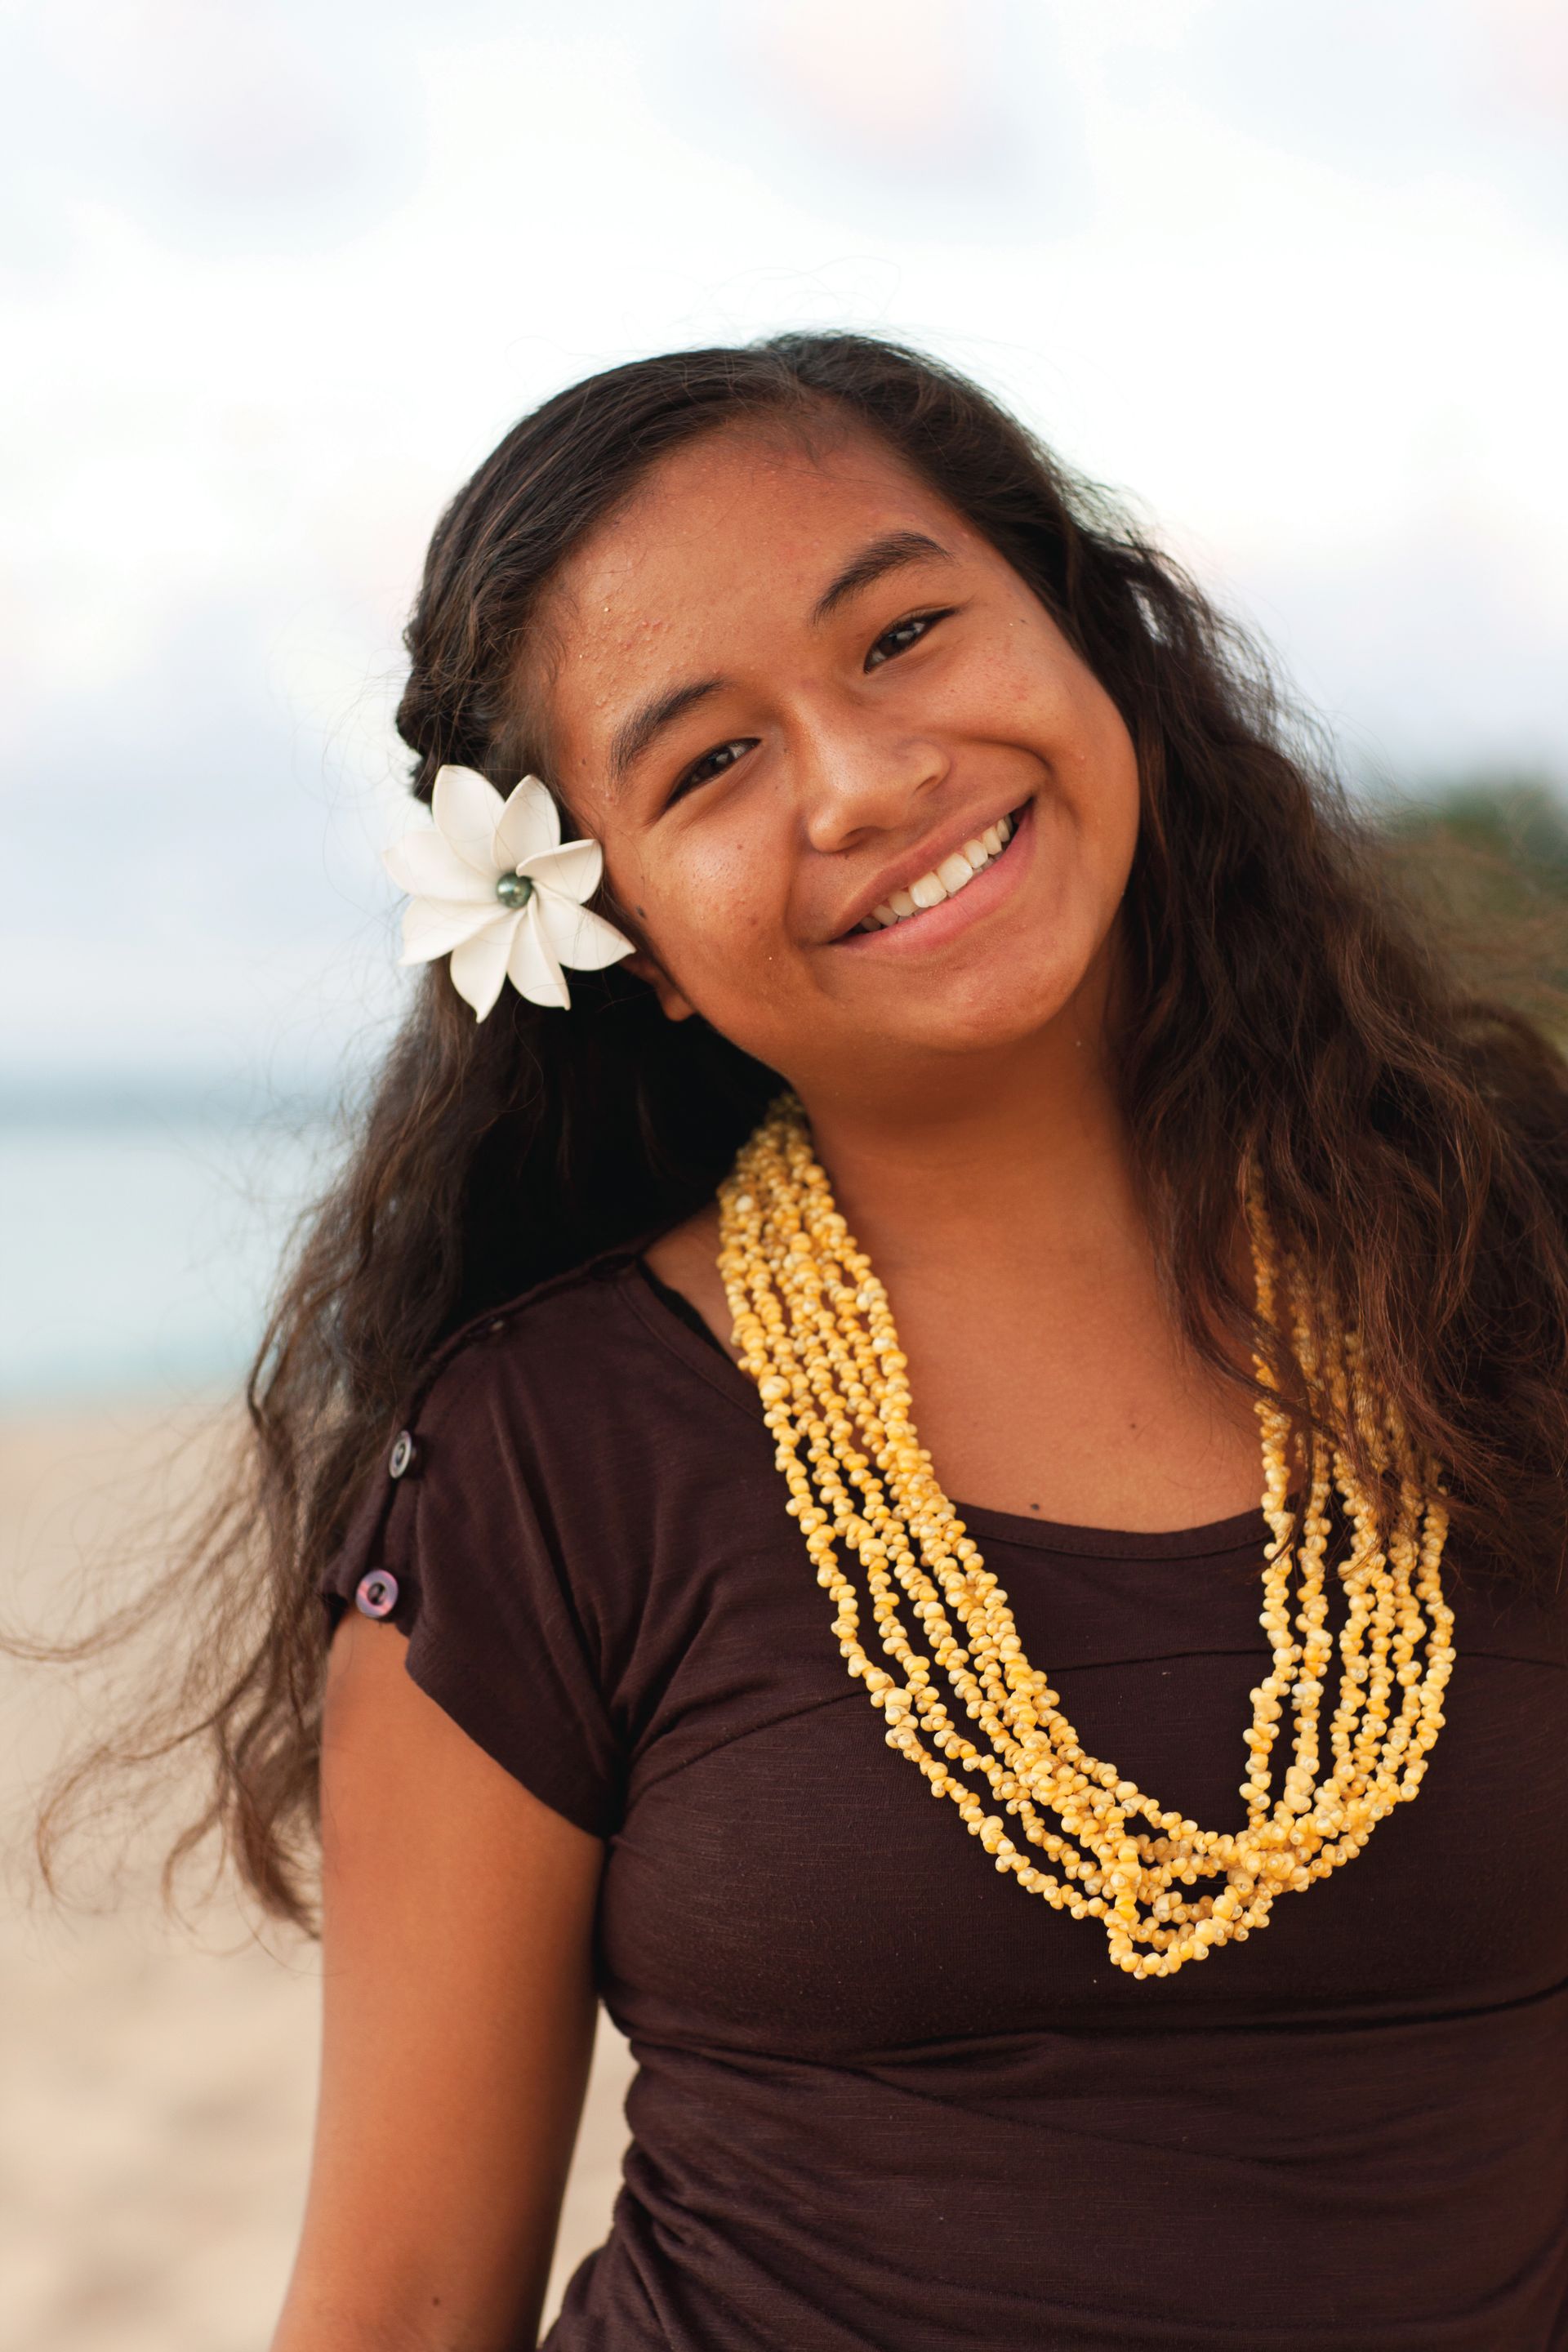 A young woman outdoors in Hawaii, with a flower in her hair, smiling.